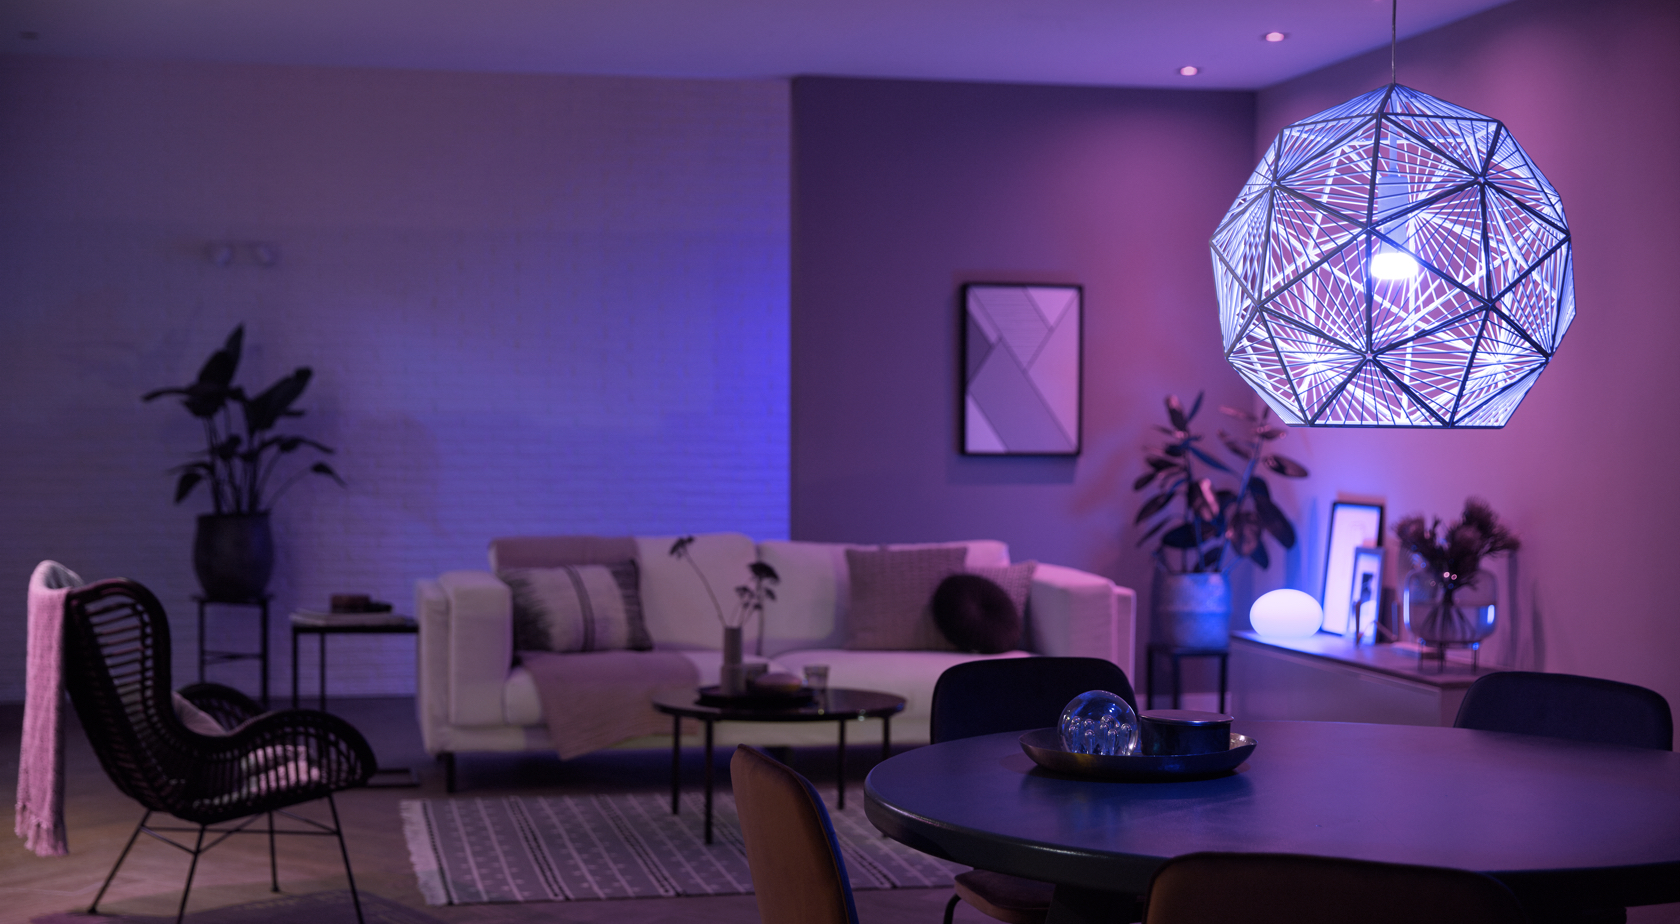 Living space with shades of blue and purple lighting